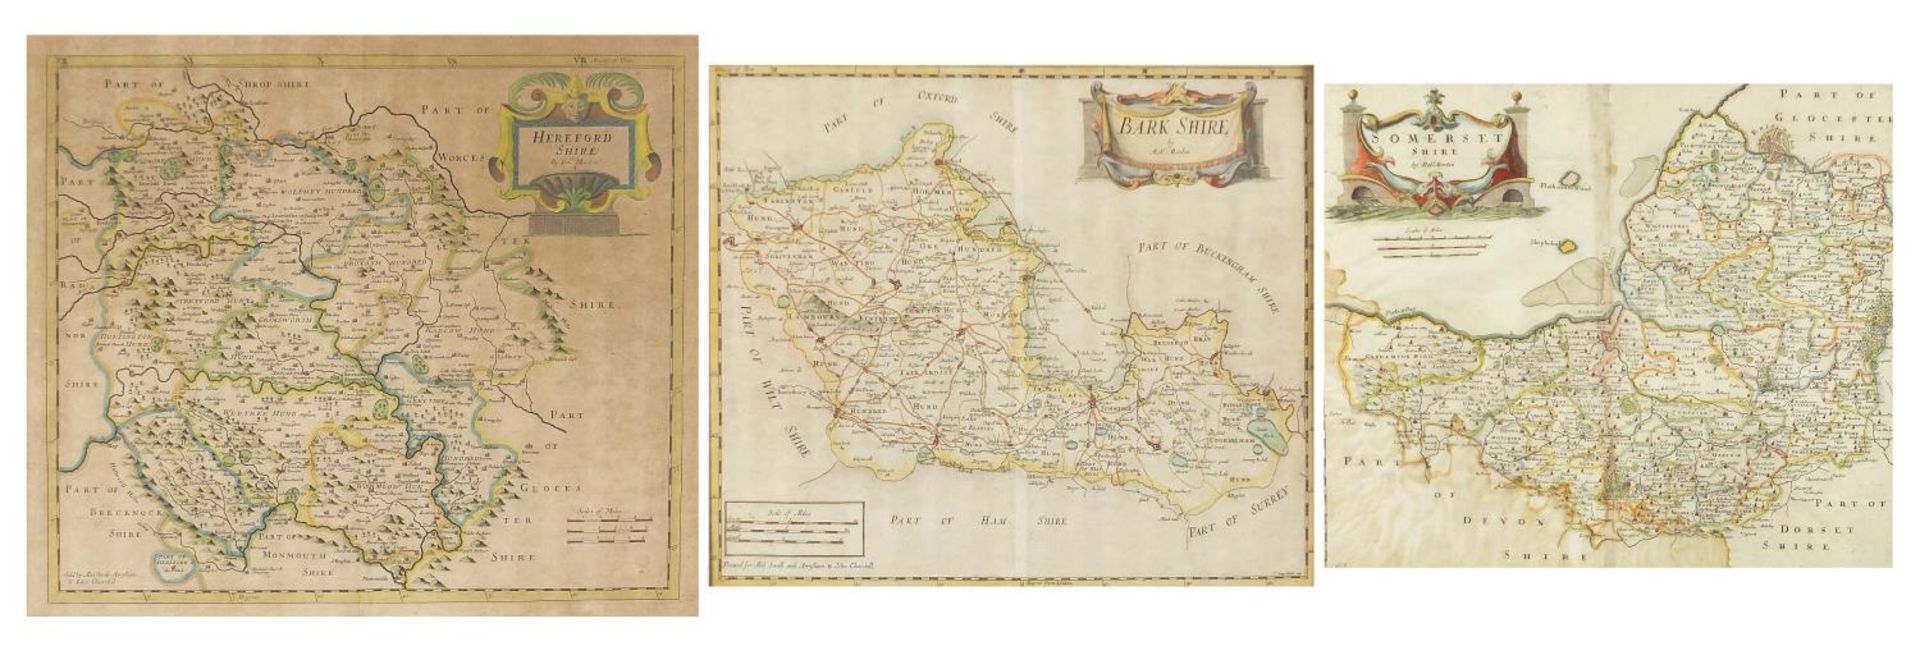 Three 18th century hand coloured maps by Robert Morden comprising Herefordshire, Somersetshire and